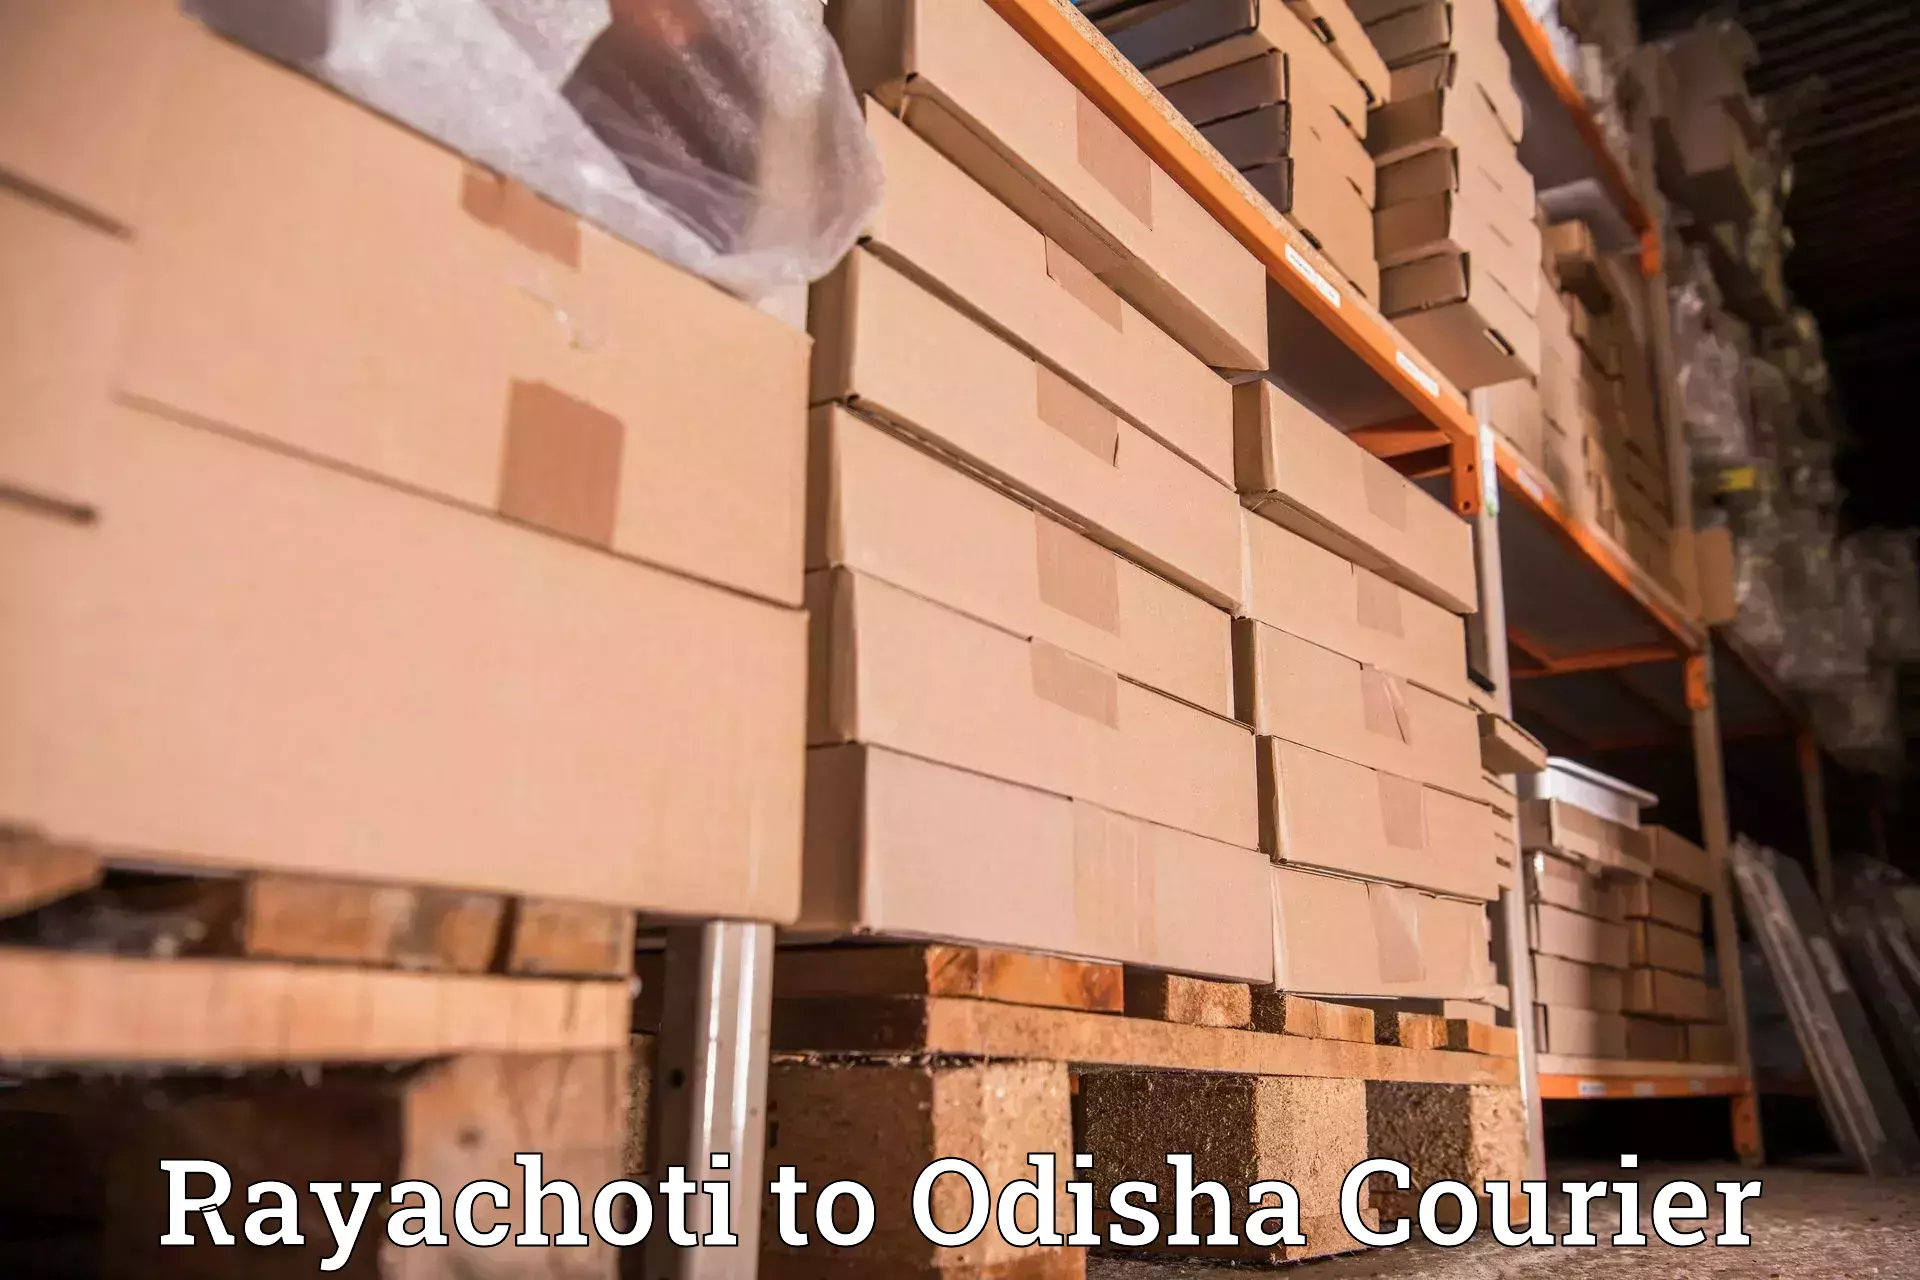 Parcel service for businesses Rayachoti to Udala